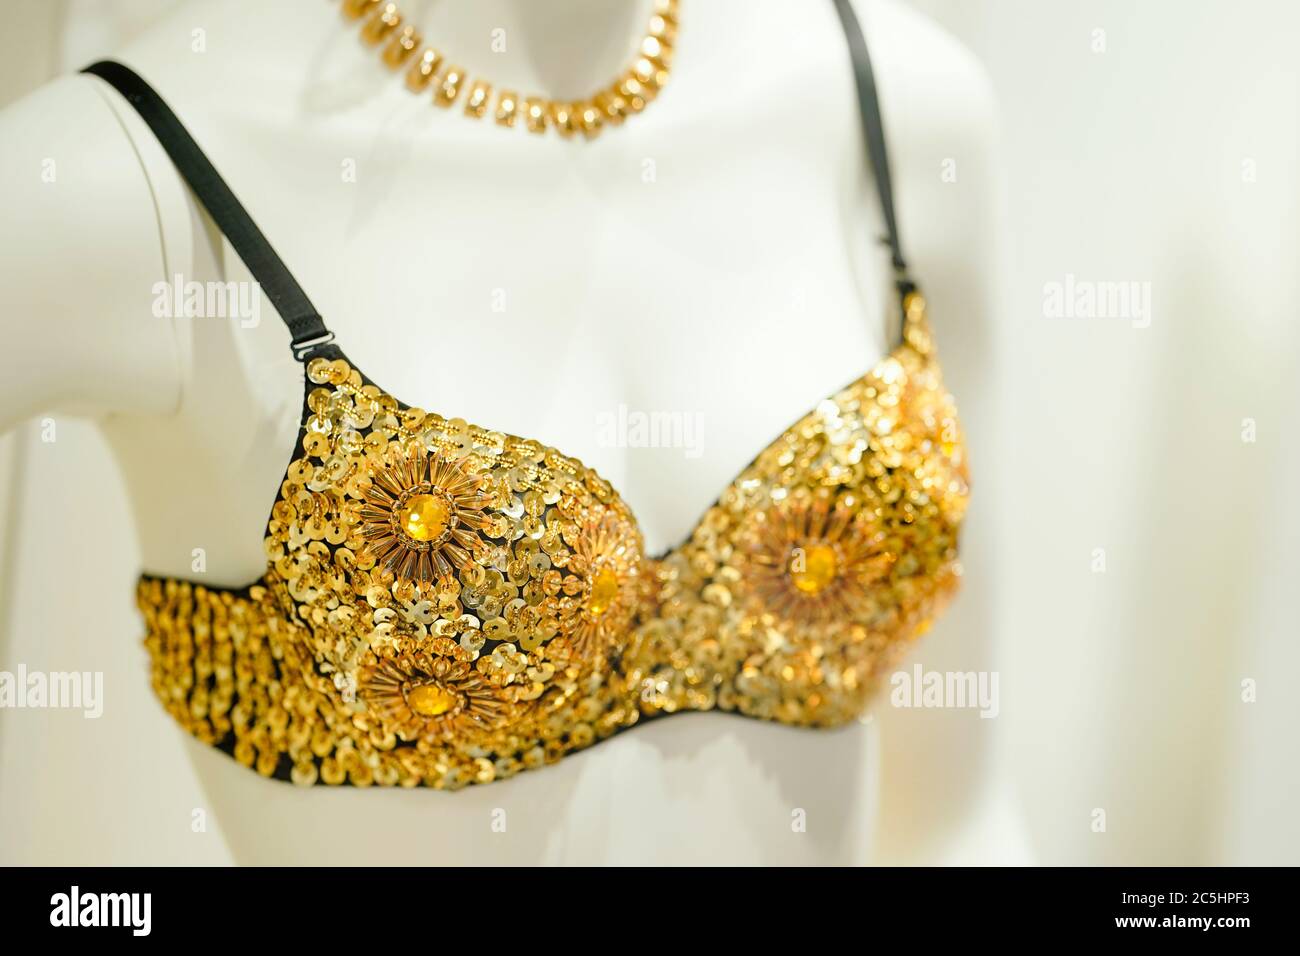 Bad Rappenau, Germany. 03rd July, 2020. A bikini by the Brazilian actress  and singer Carmen Miranda stands in a display case during a press tour  before the opening of the bikini museum.